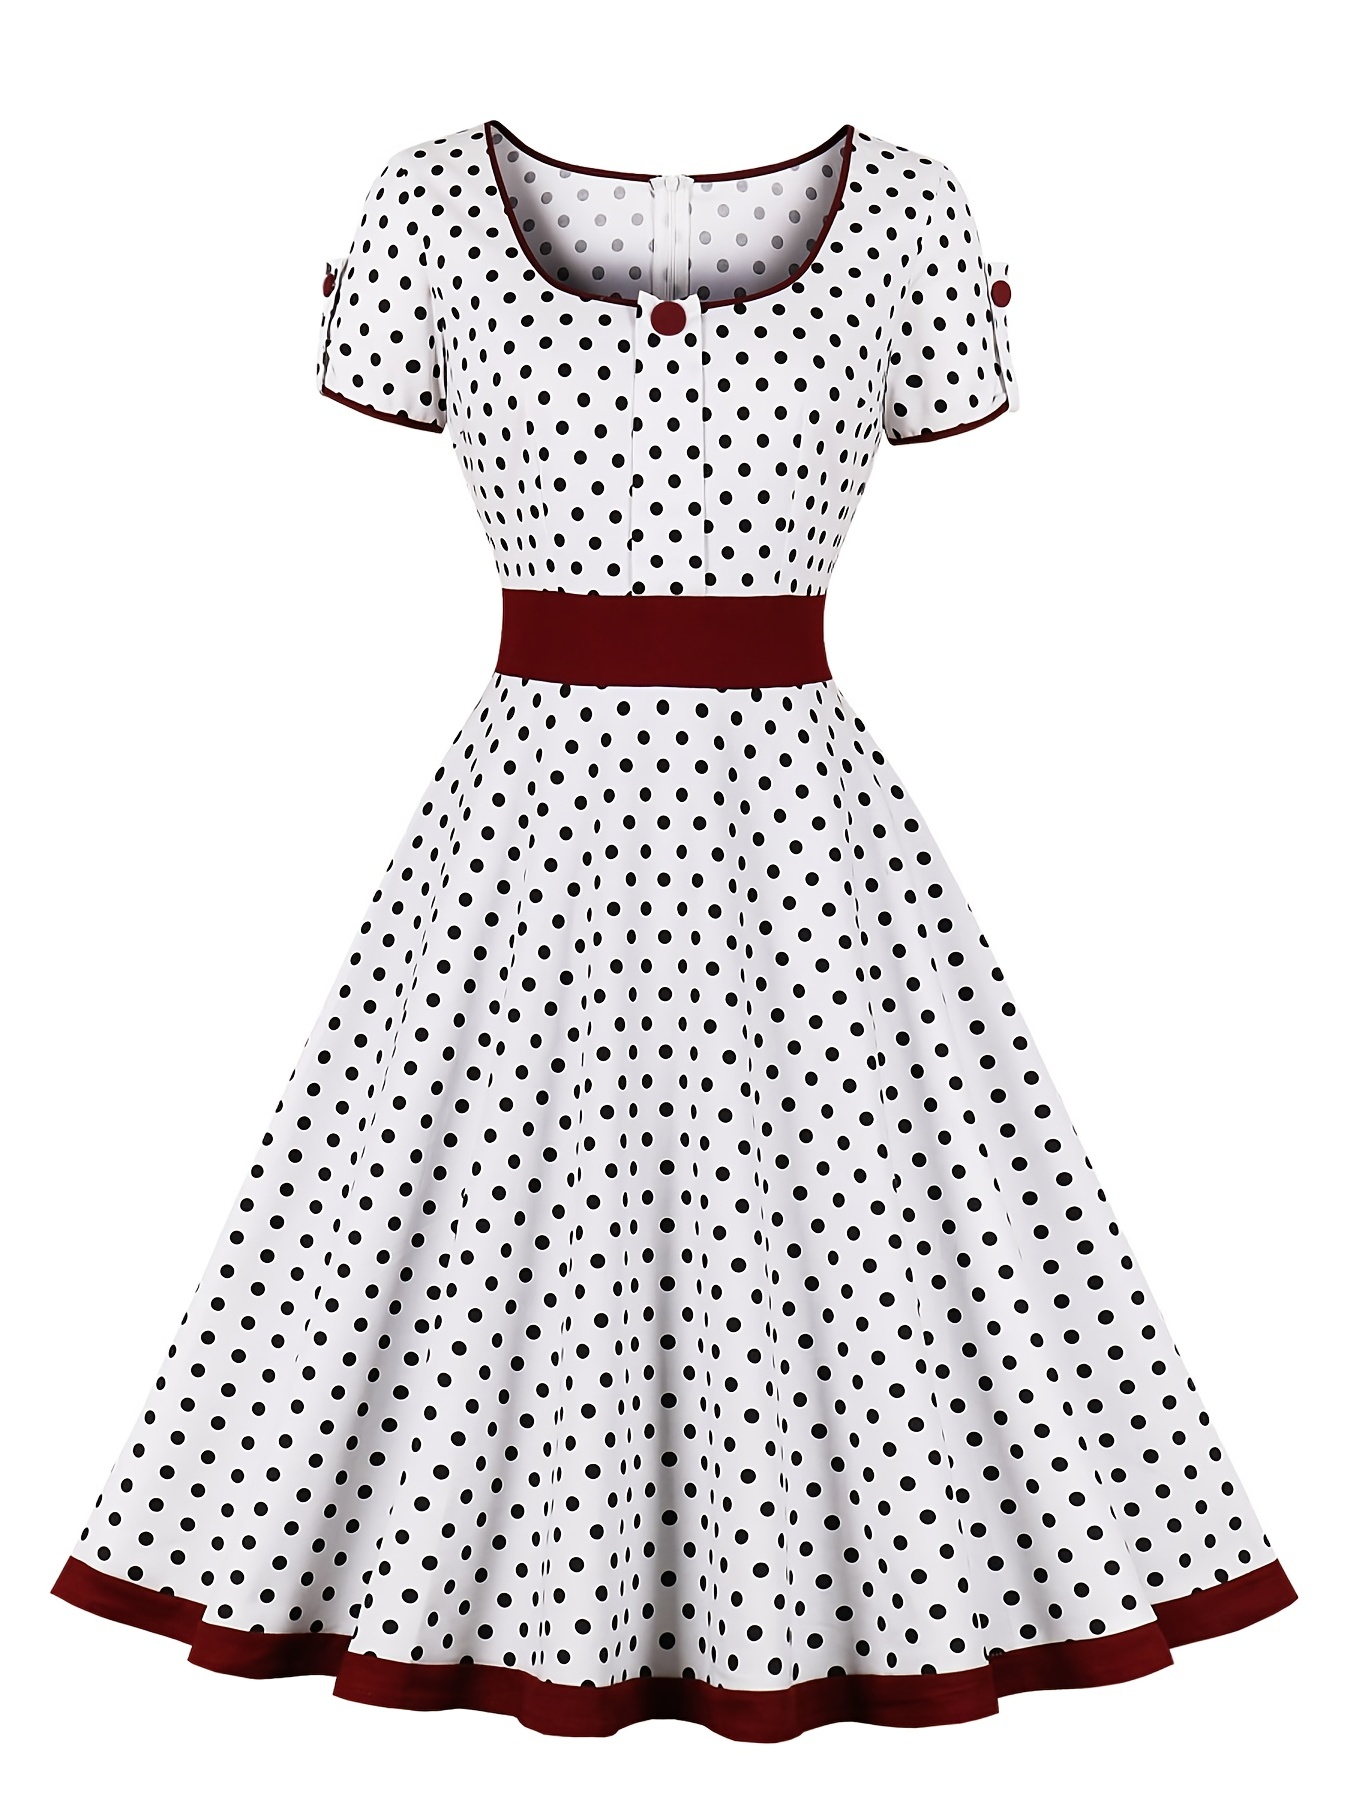  Women's Audrey Hepburn Dress Plaid Printed Casual Lounge Dress  50s 60s Vintage Flared Dress Rockabilly Party Outfits Blue : Clothing,  Shoes & Jewelry